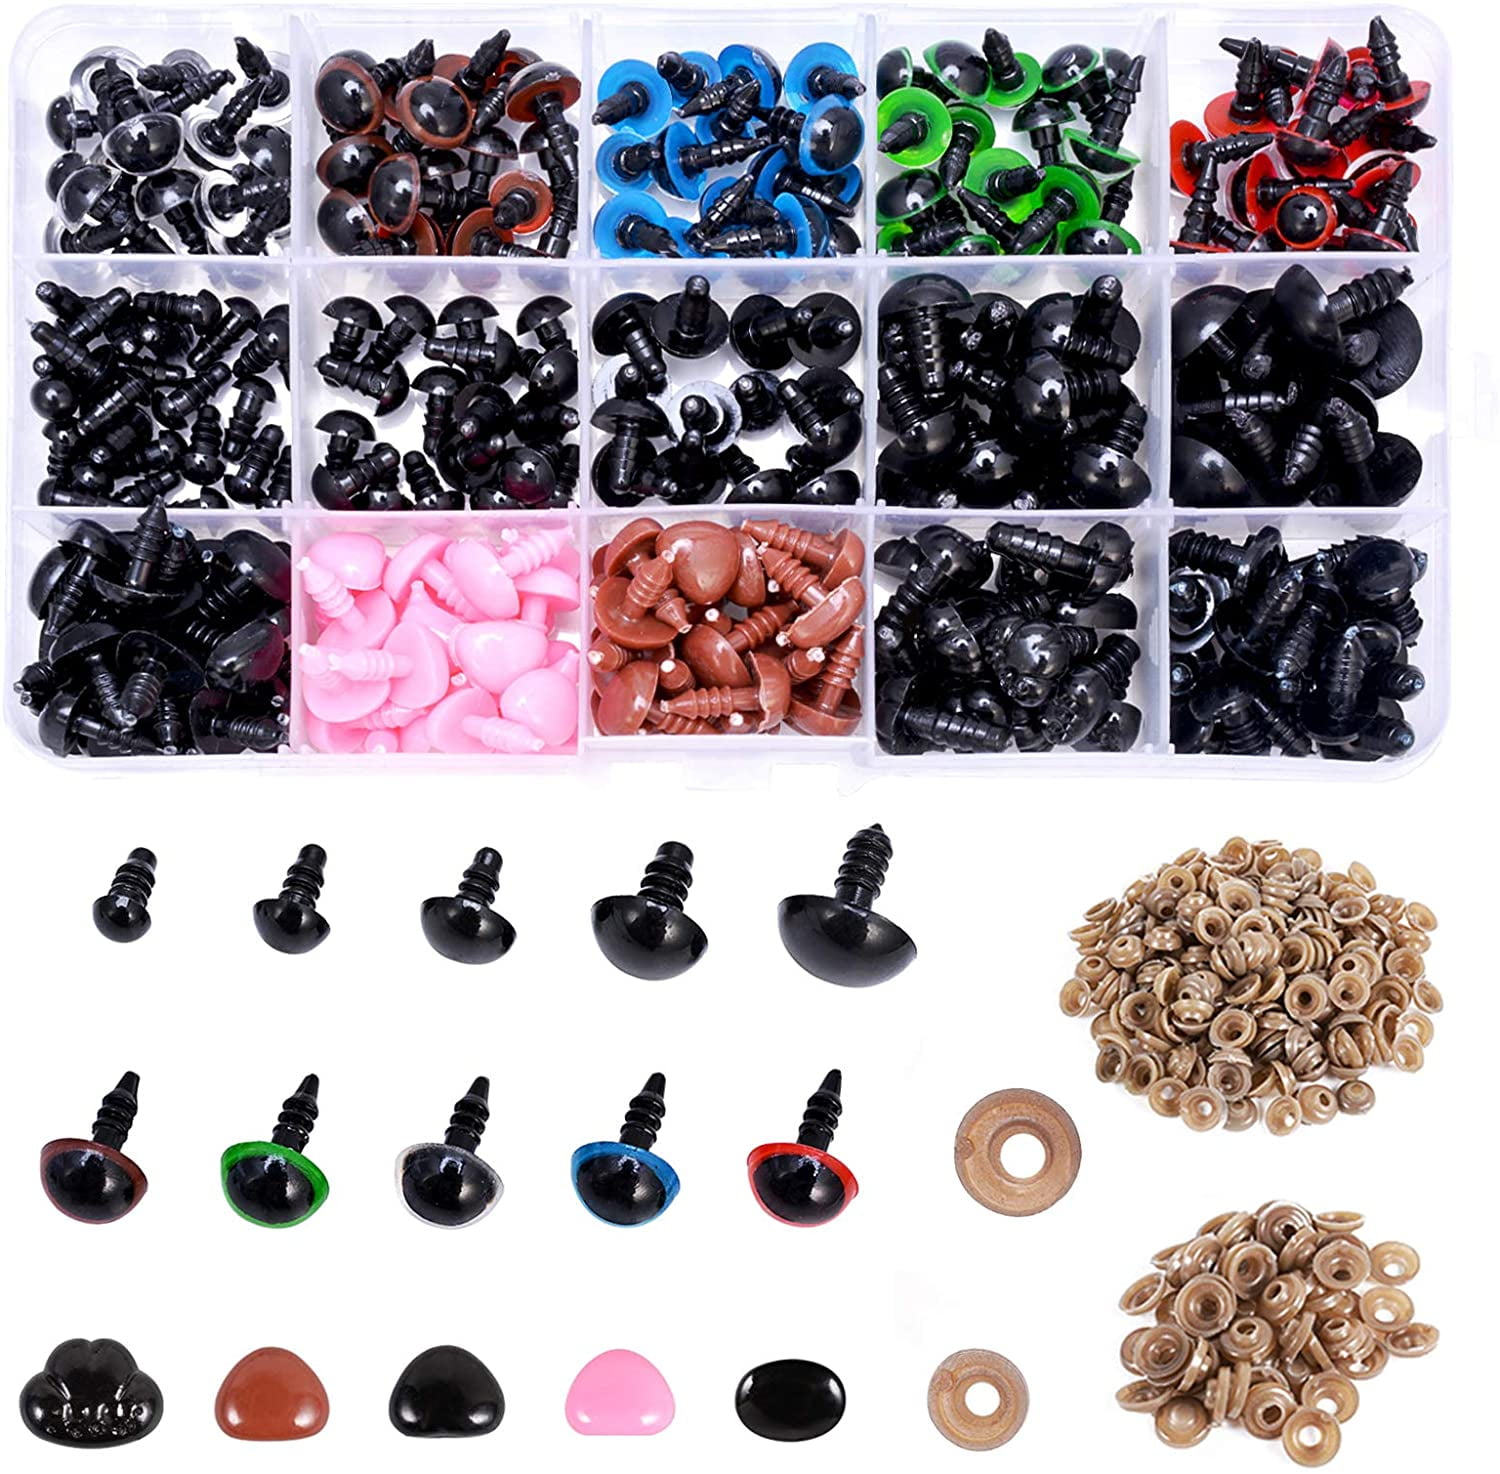  160pcs Large Safety Eyes for Amigurumi Glitter Eye for Stuffed  Animals for DIY Dolls Puppets Bear Crafts Animals Amigurumi Making  Supplies(Colorful)